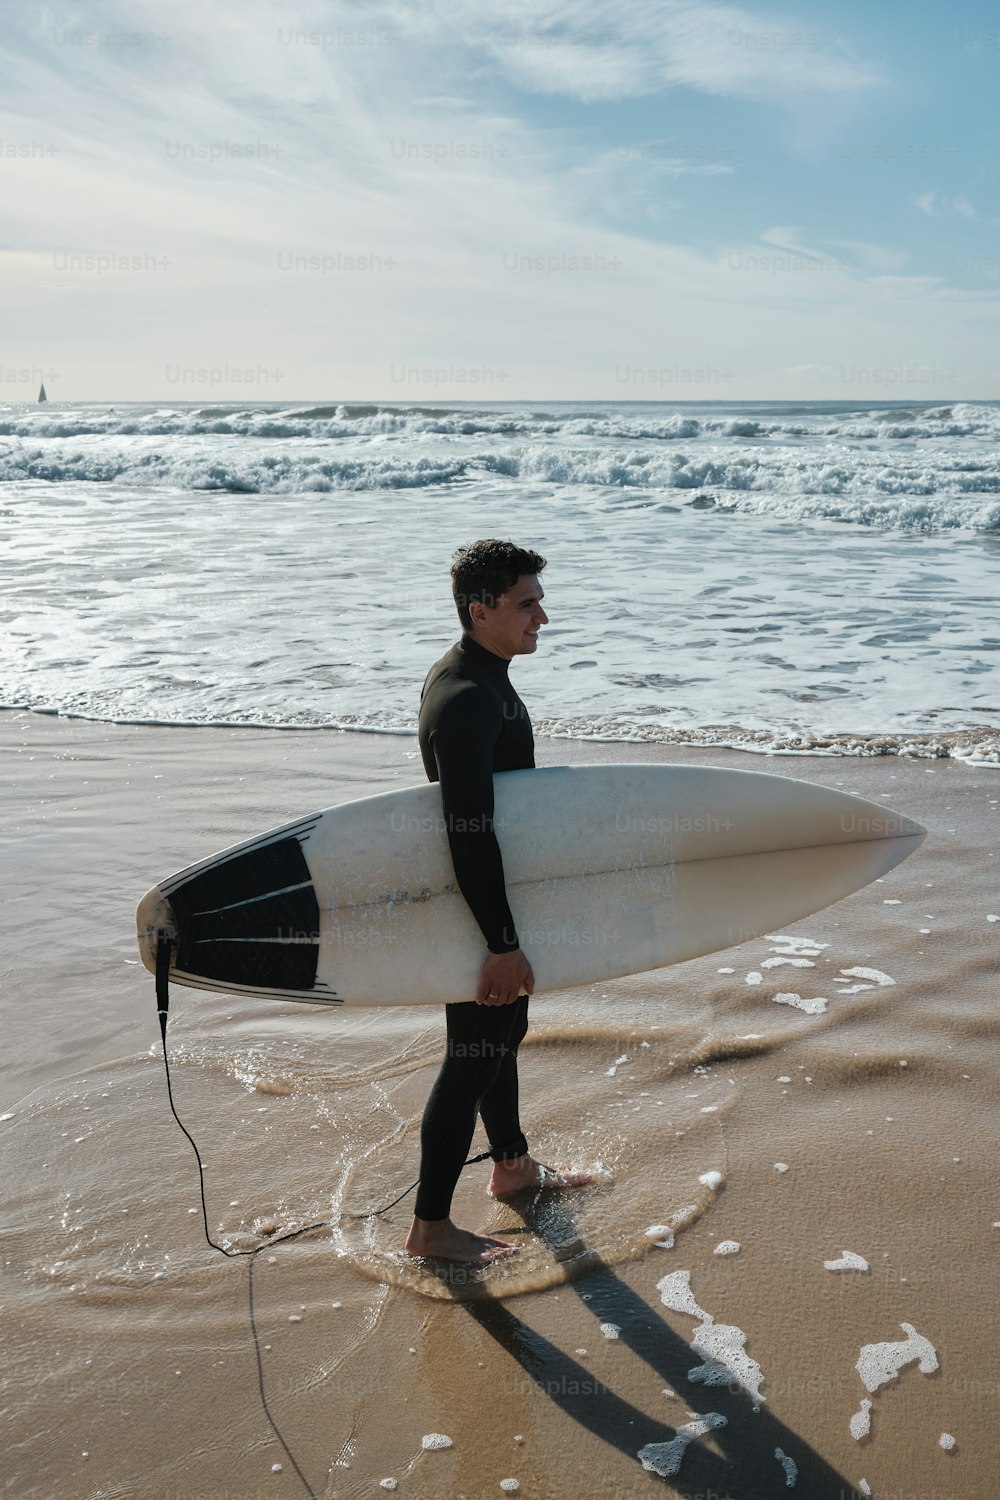 a man in a wet suit carrying a surfboard on the beach